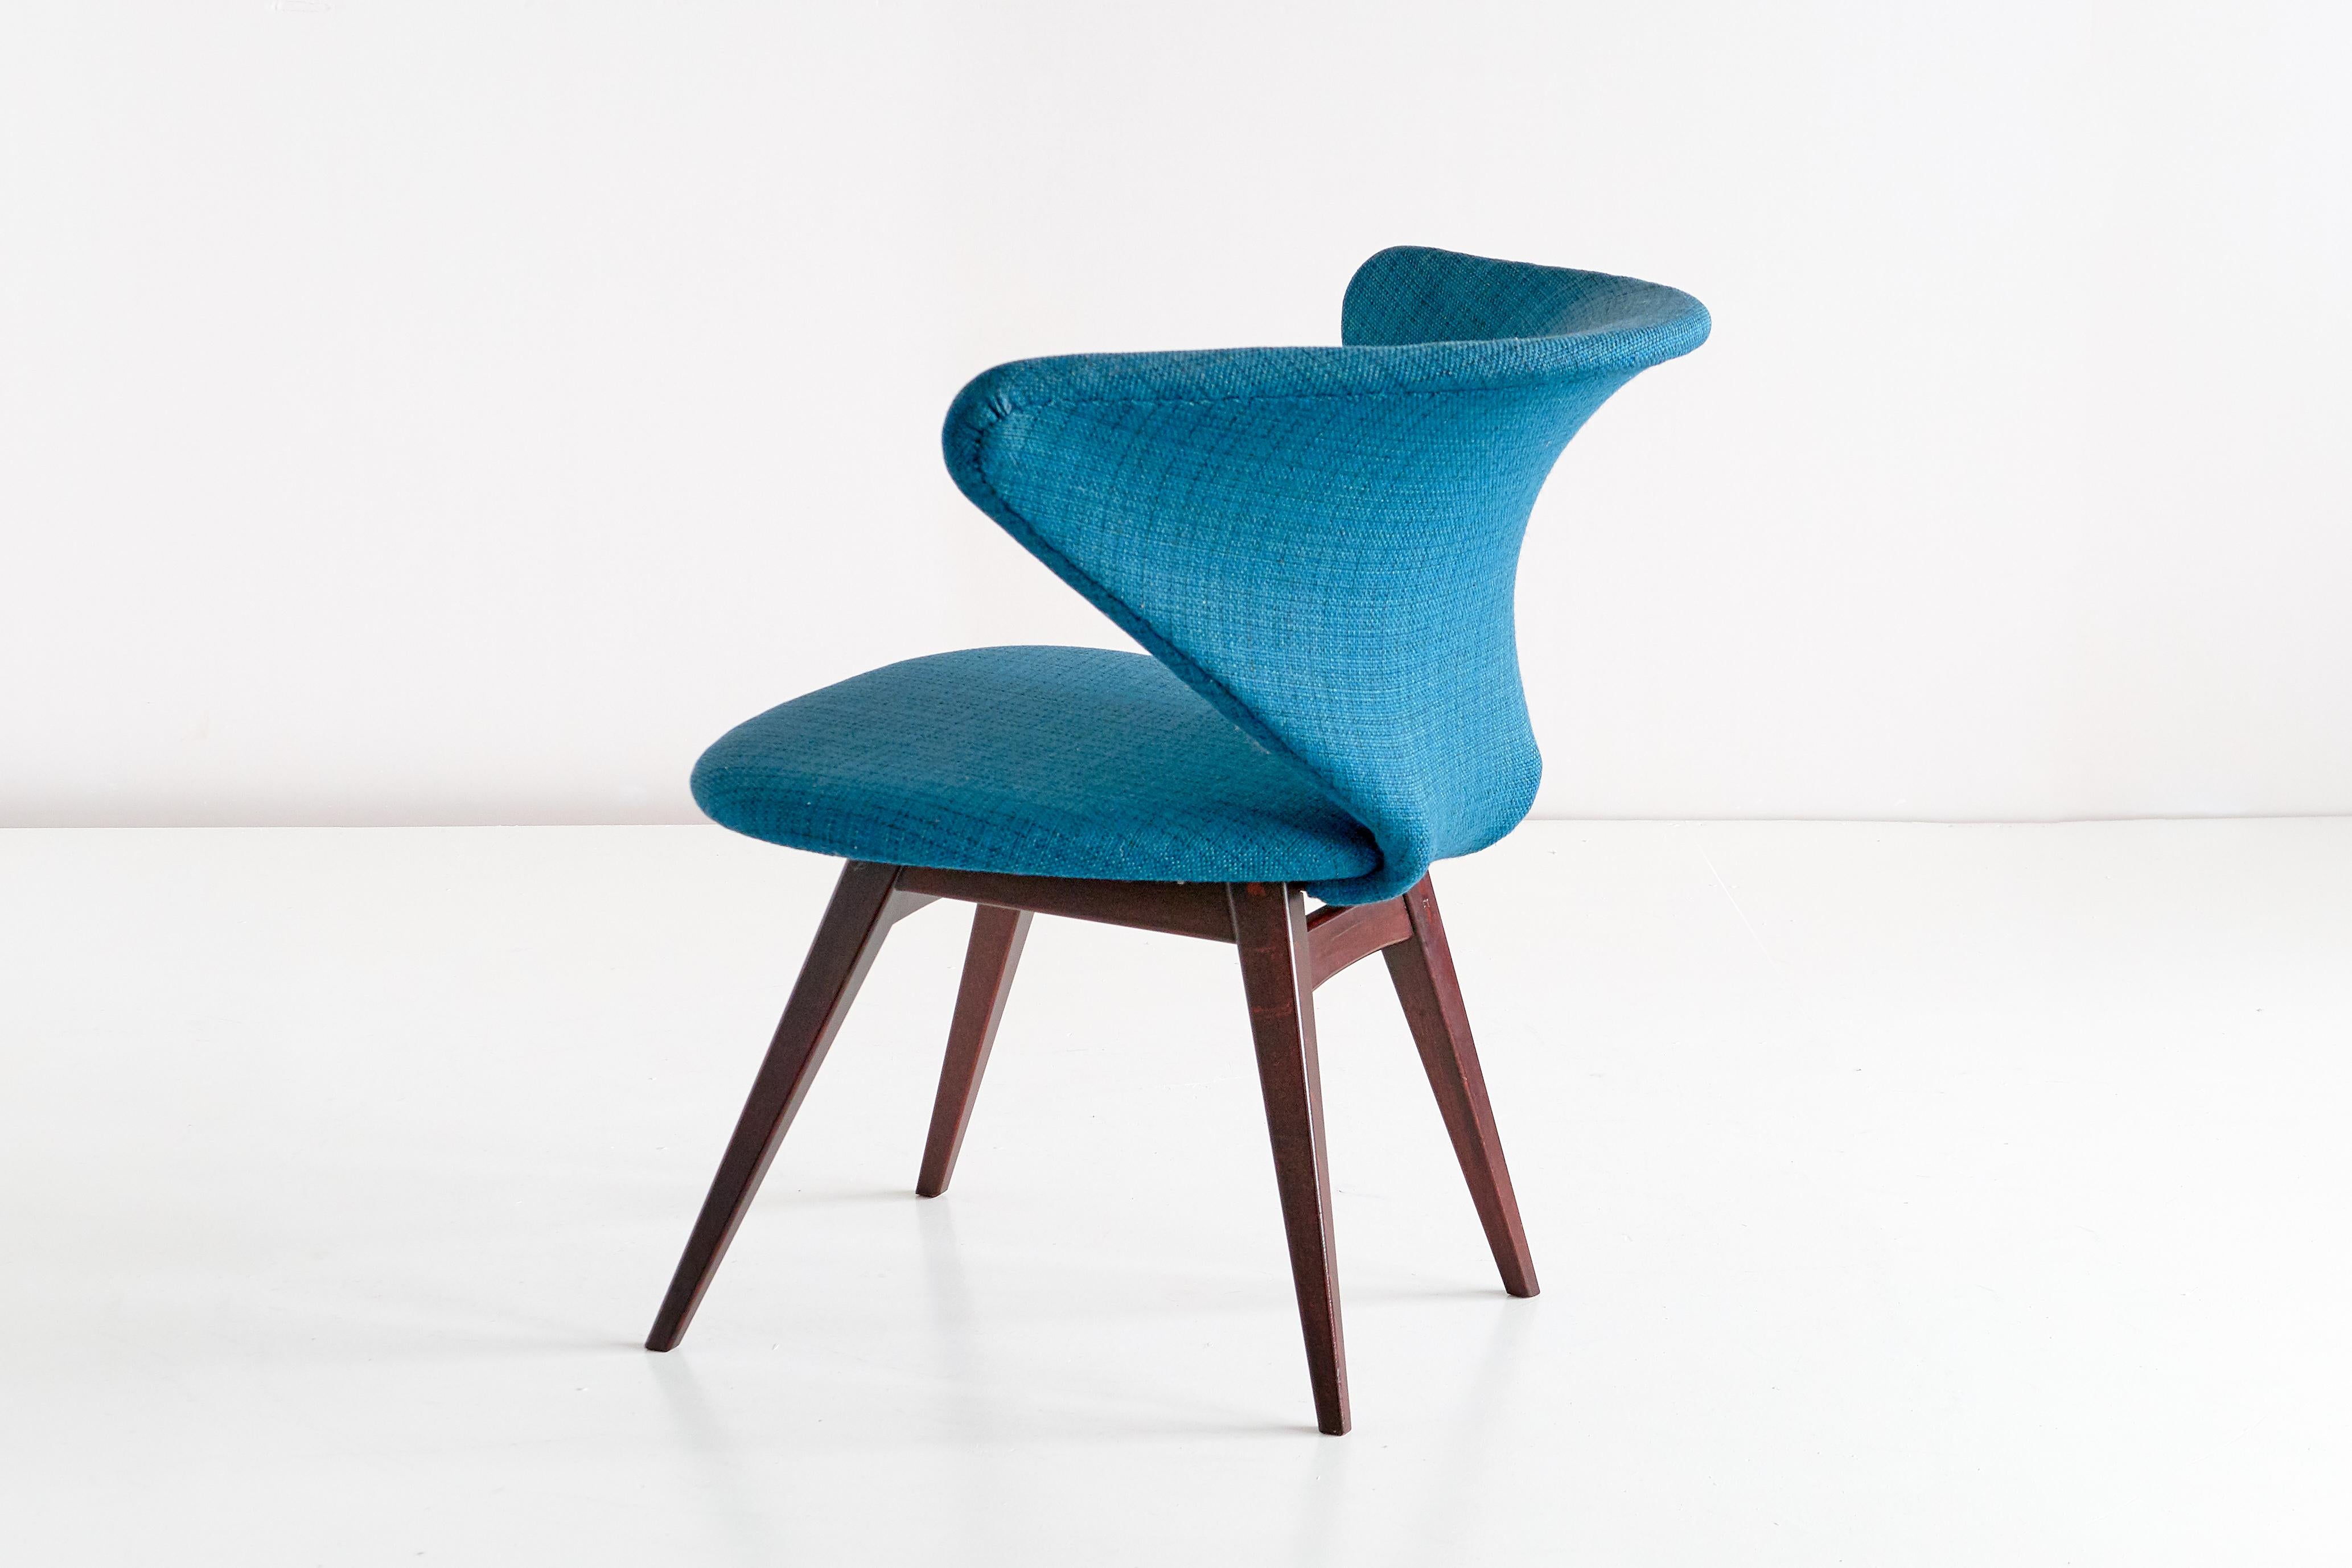 Sigfrid Ljungqvist Wing Shaped Chair, Petrol Blue Fabric and Beech, Sweden, 1958 For Sale 2